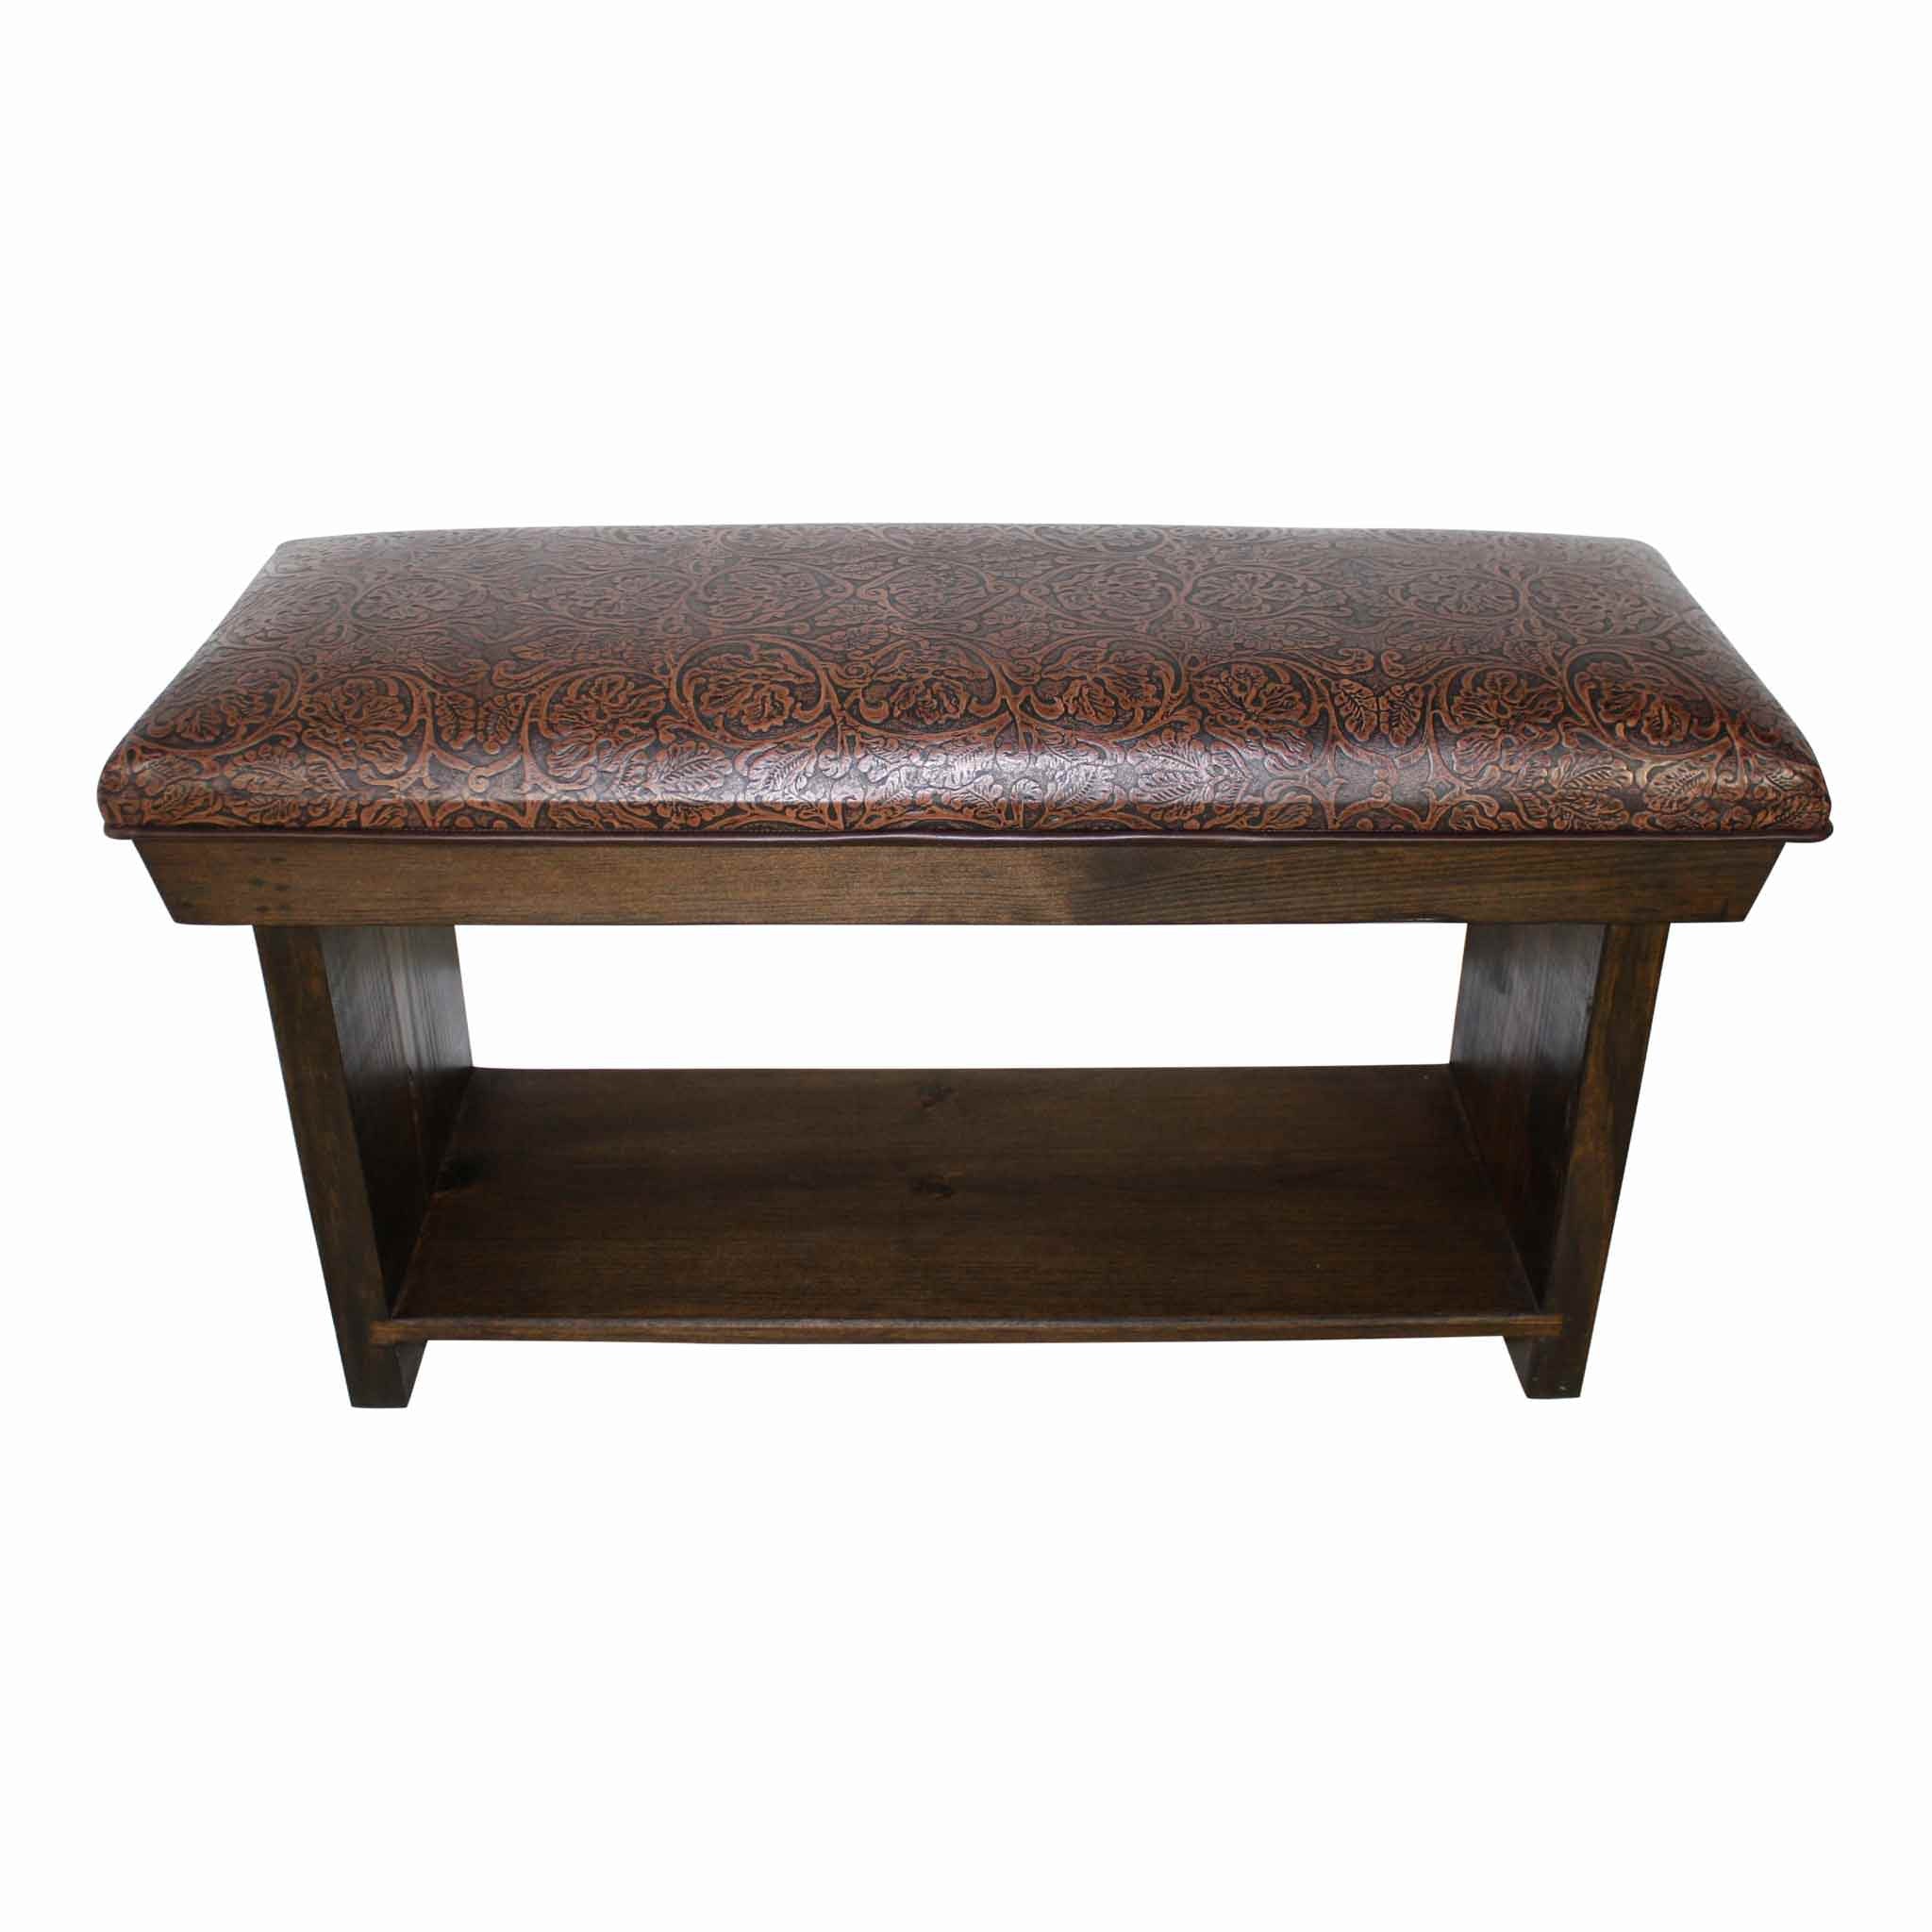 Cowboy Chocolate Pressed Leather Bench with Shelf